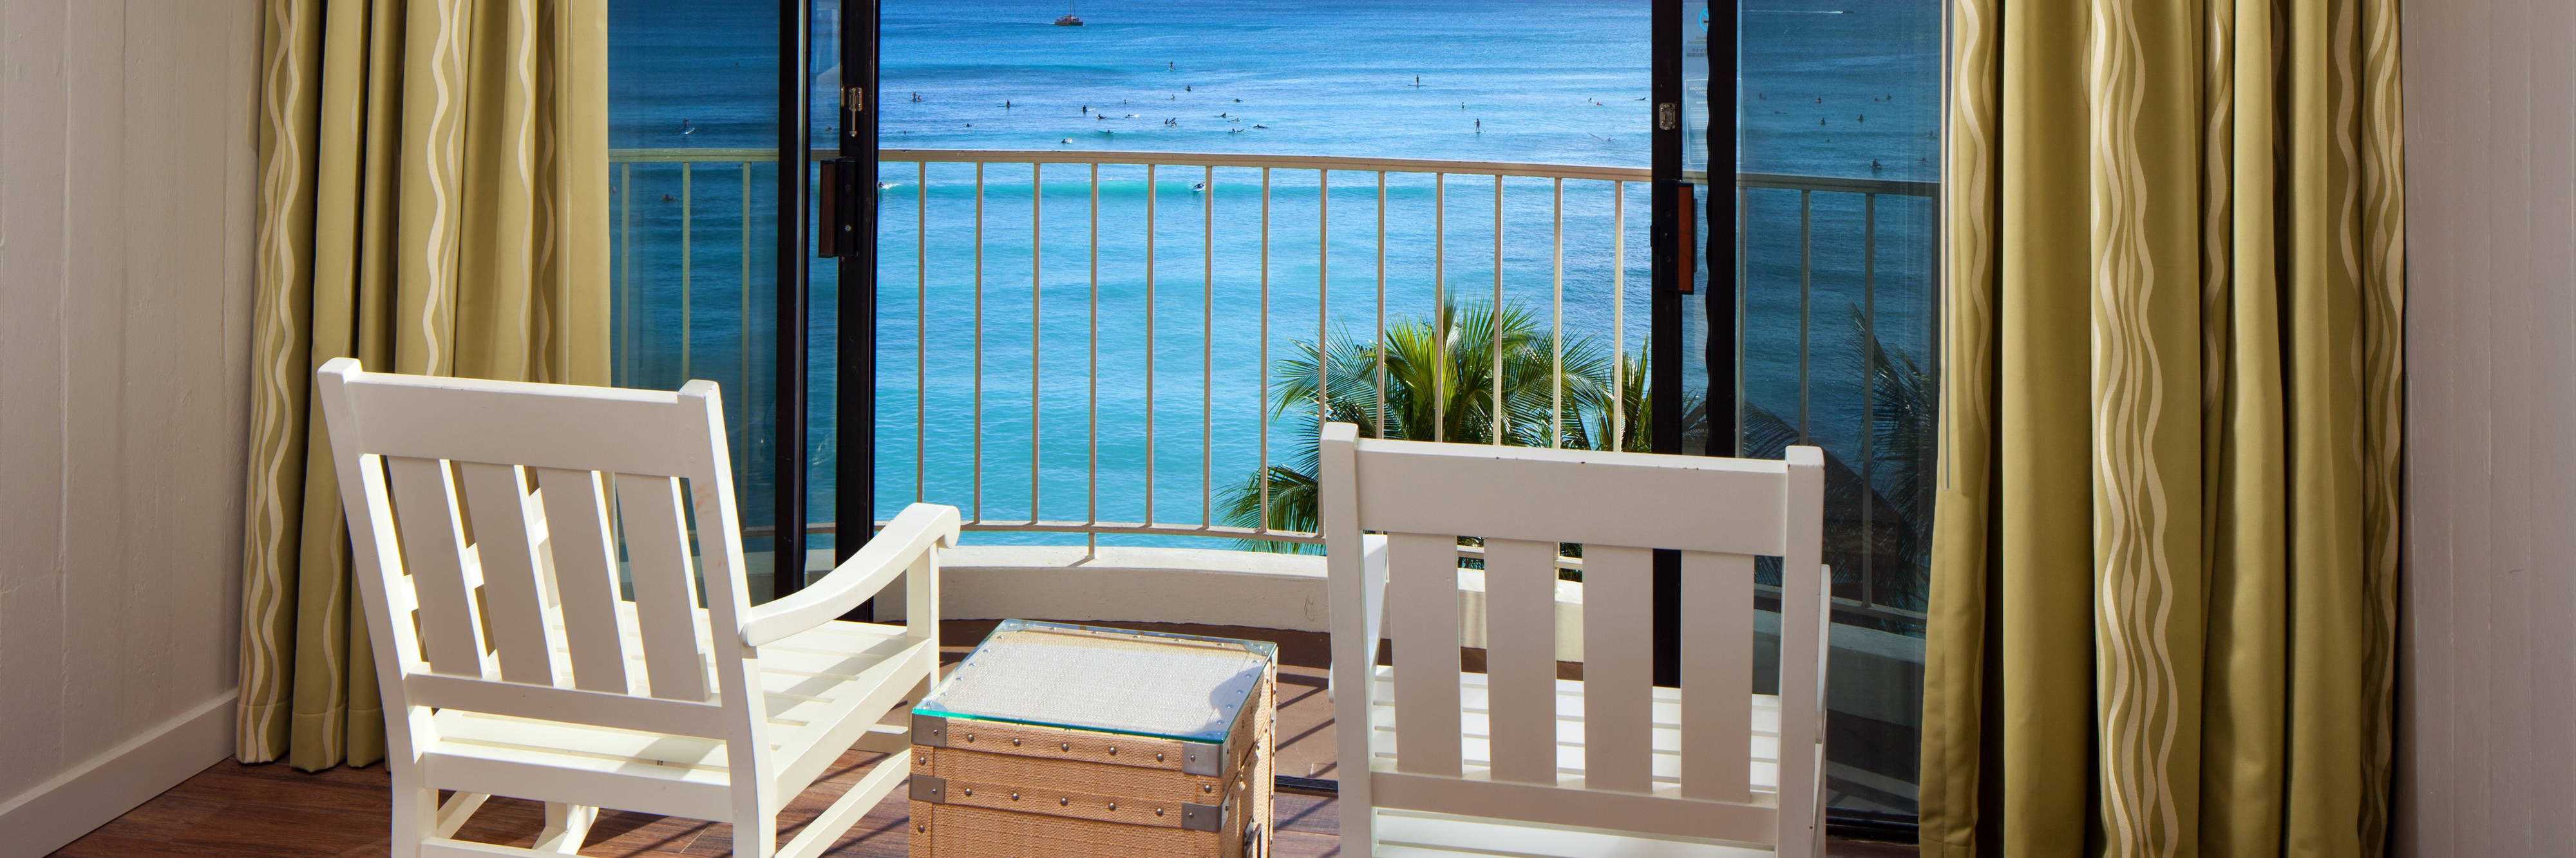 Guest room balcony with ocean views